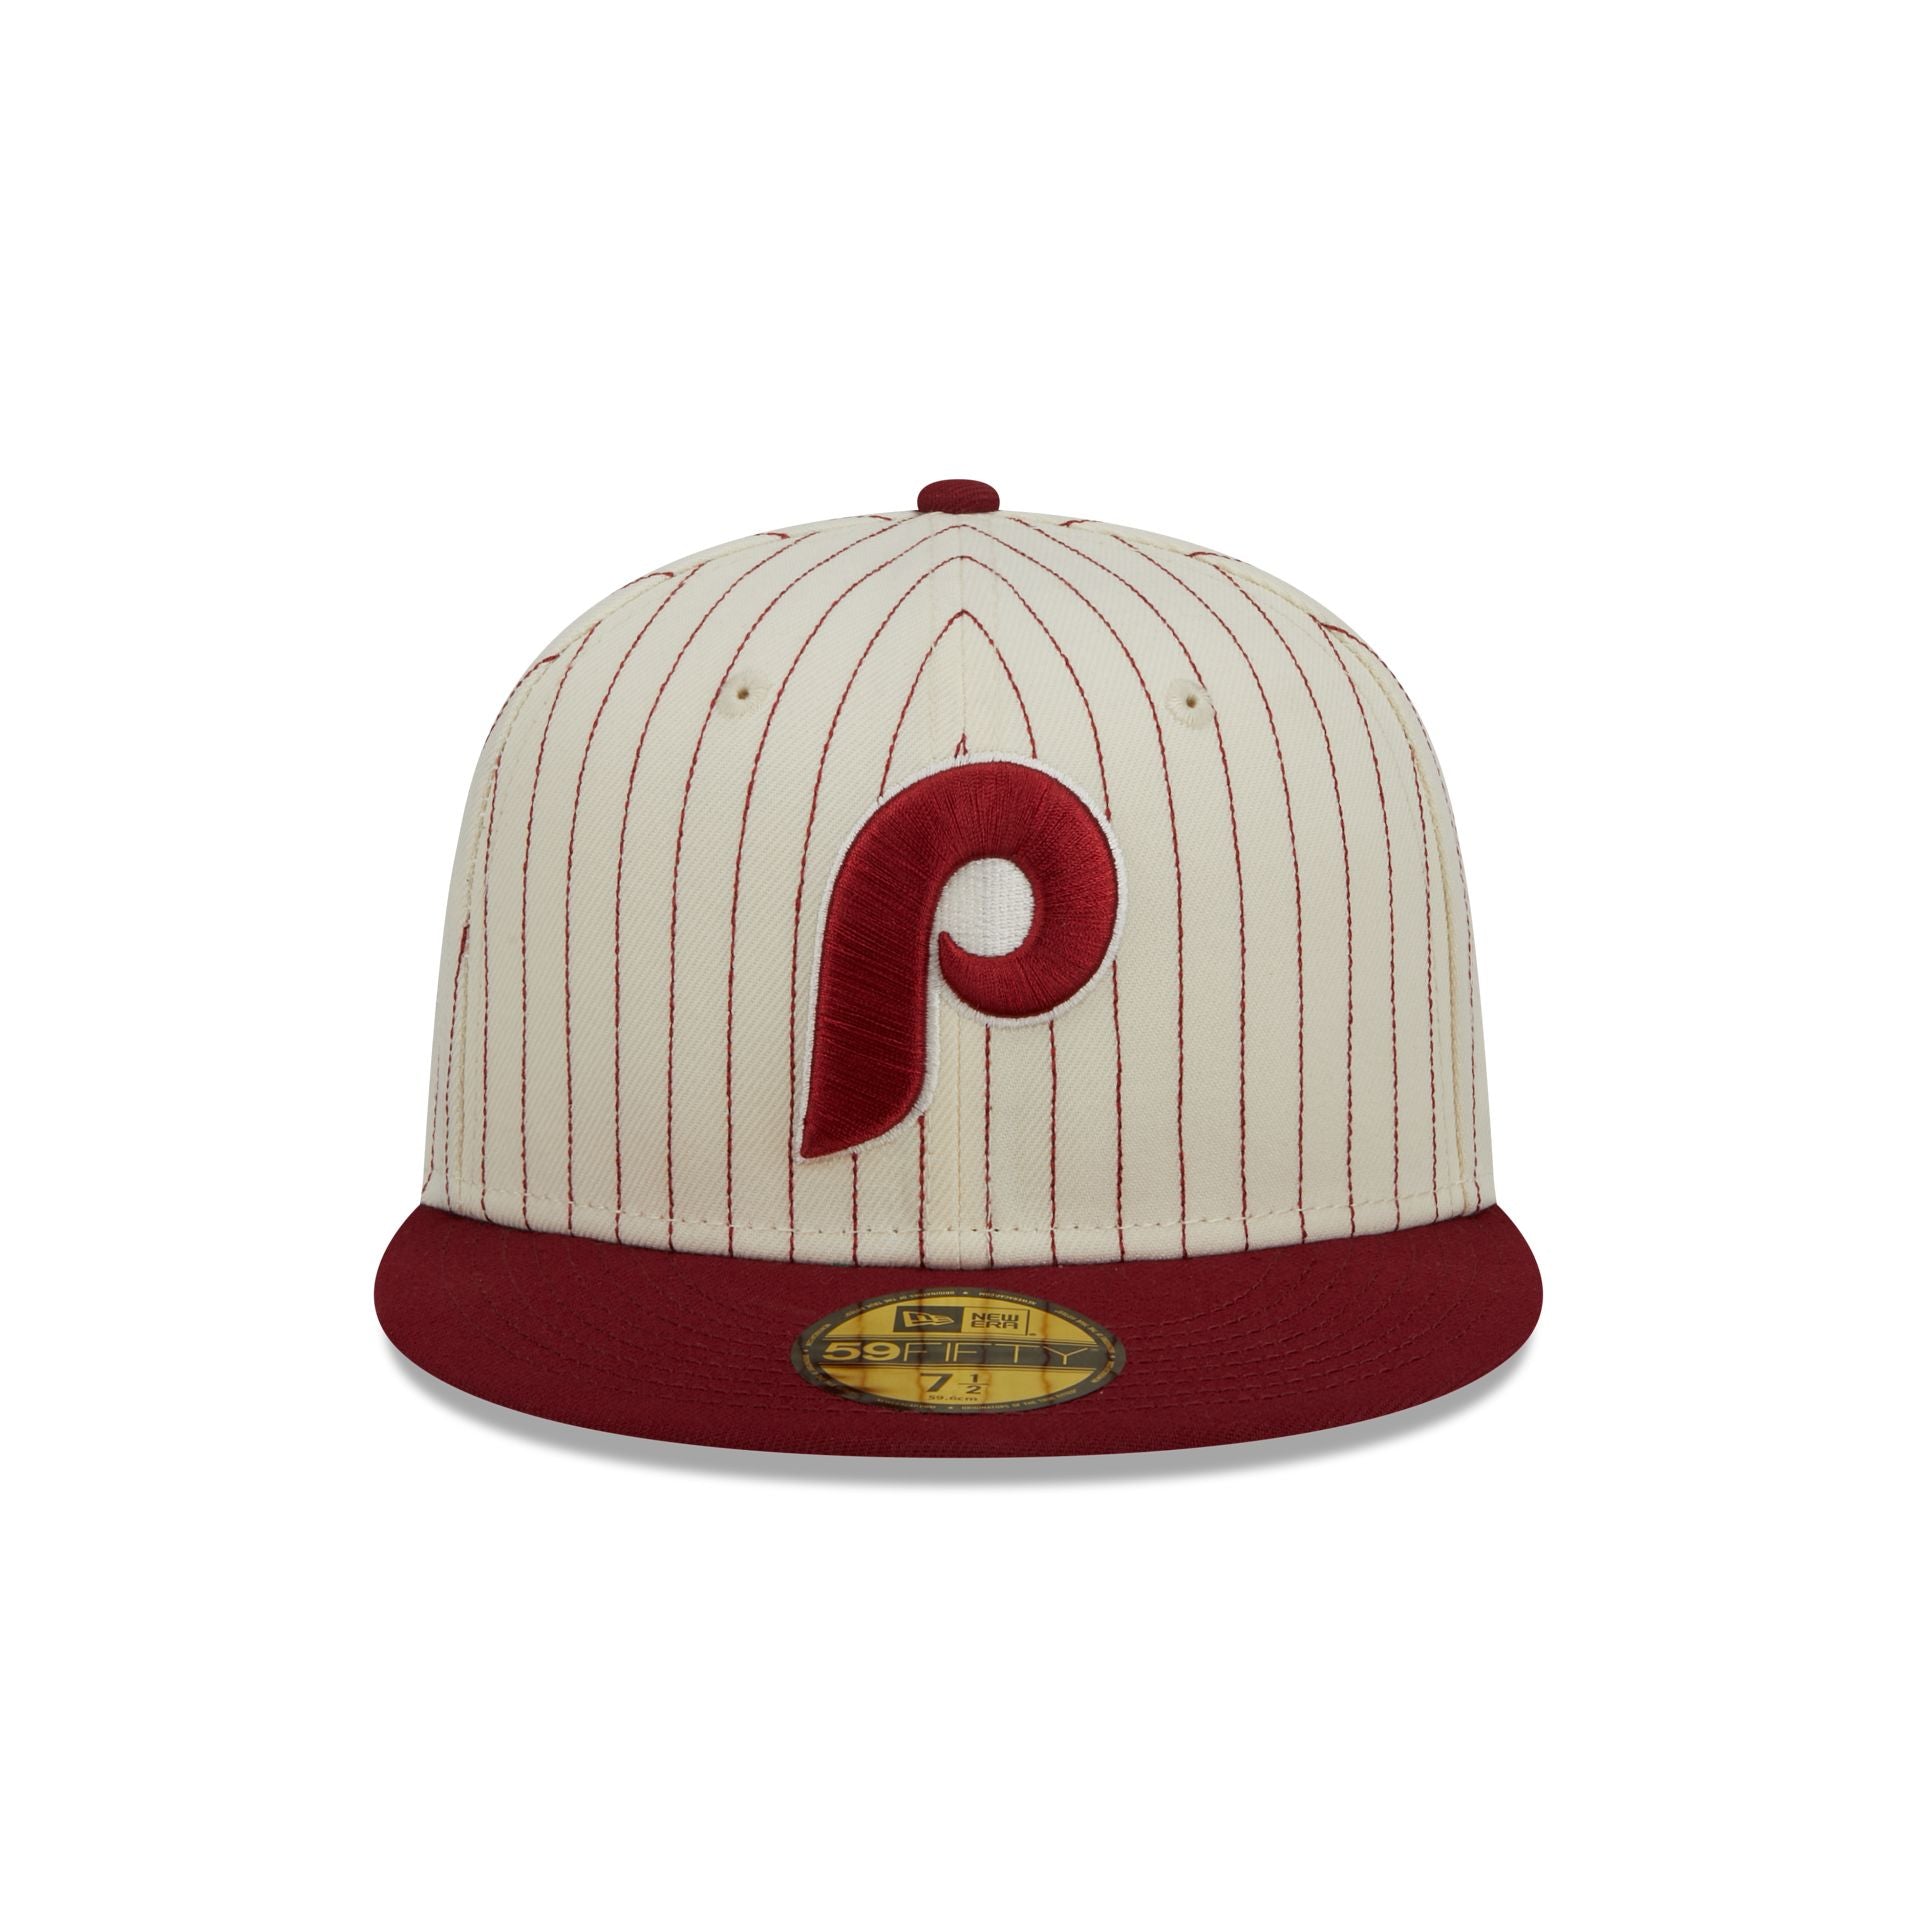 Men's St. Louis Cardinals New Era White/Light Blue Cooperstown Collection  125th Anniversary Chrome 59FIFTY Fitted